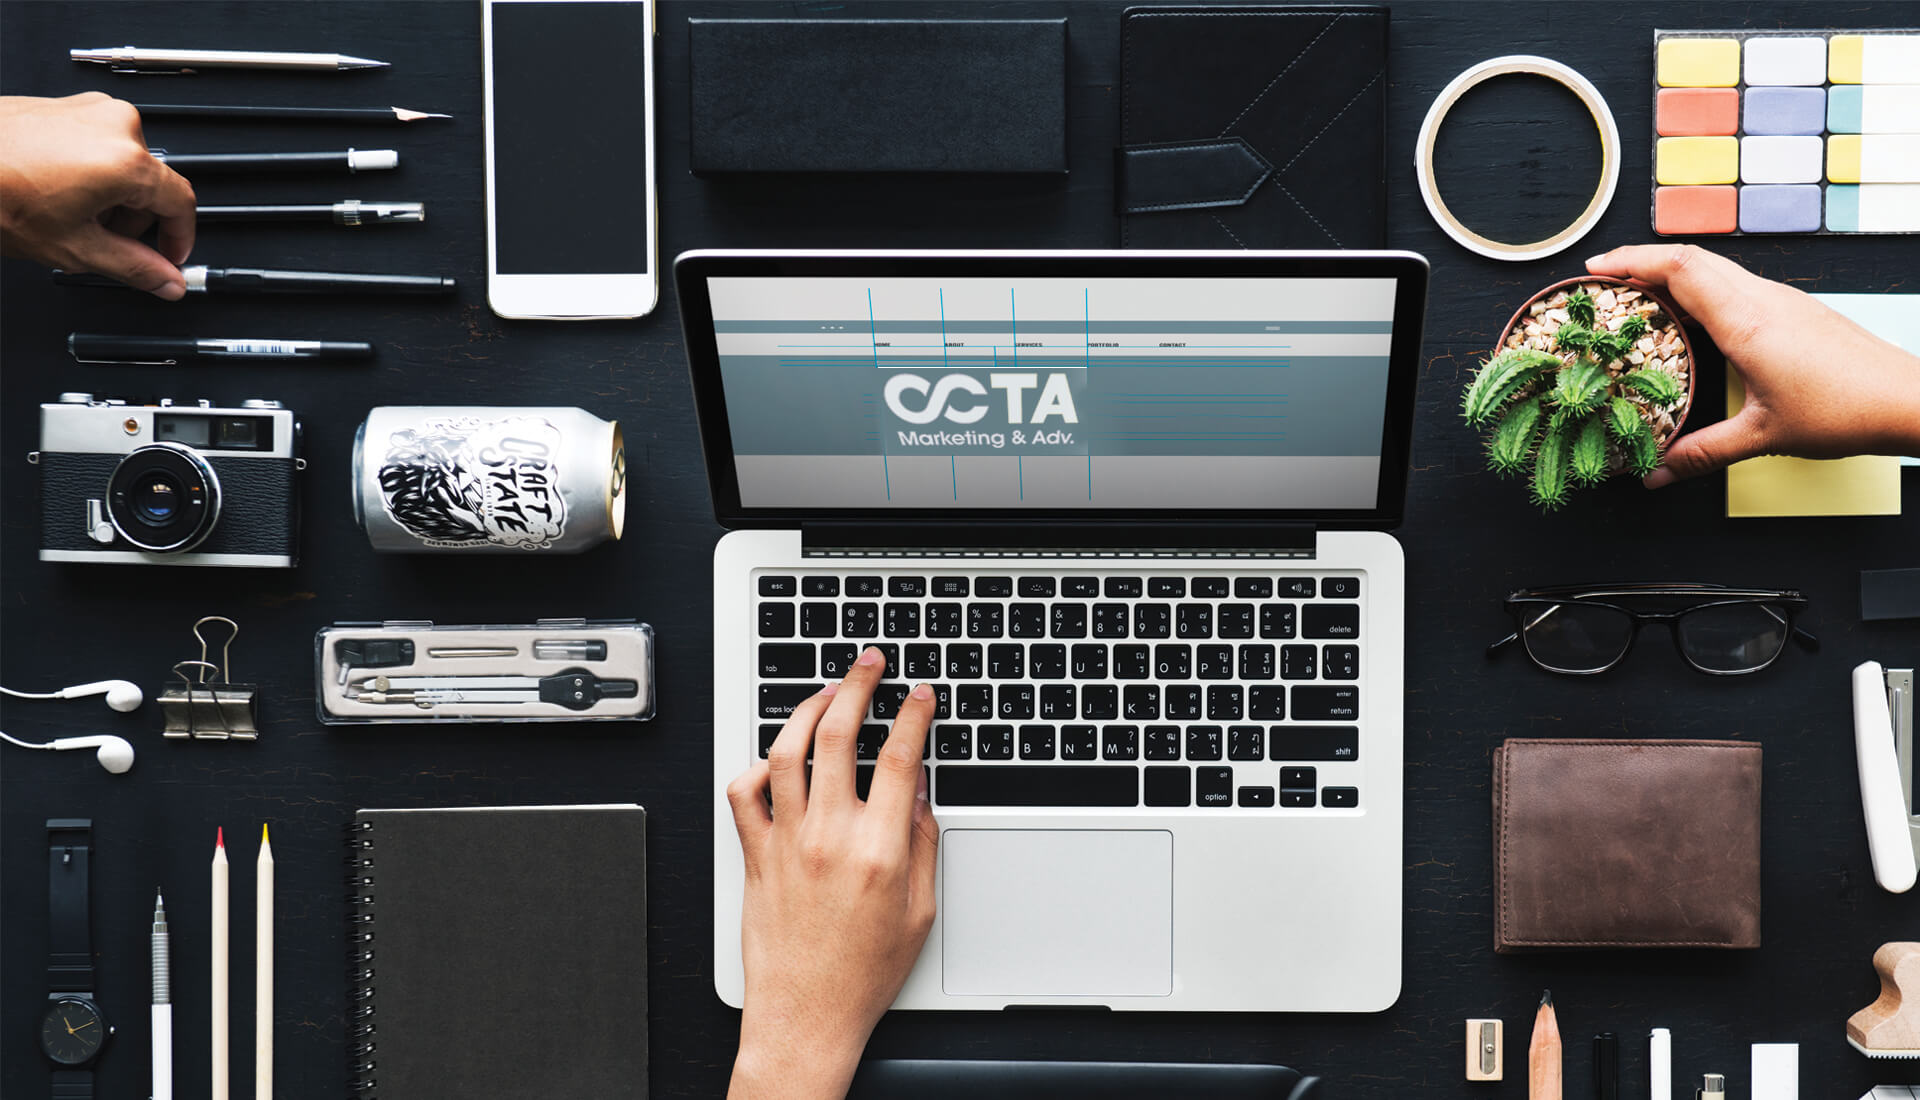 Octa for Marketing and Advertising